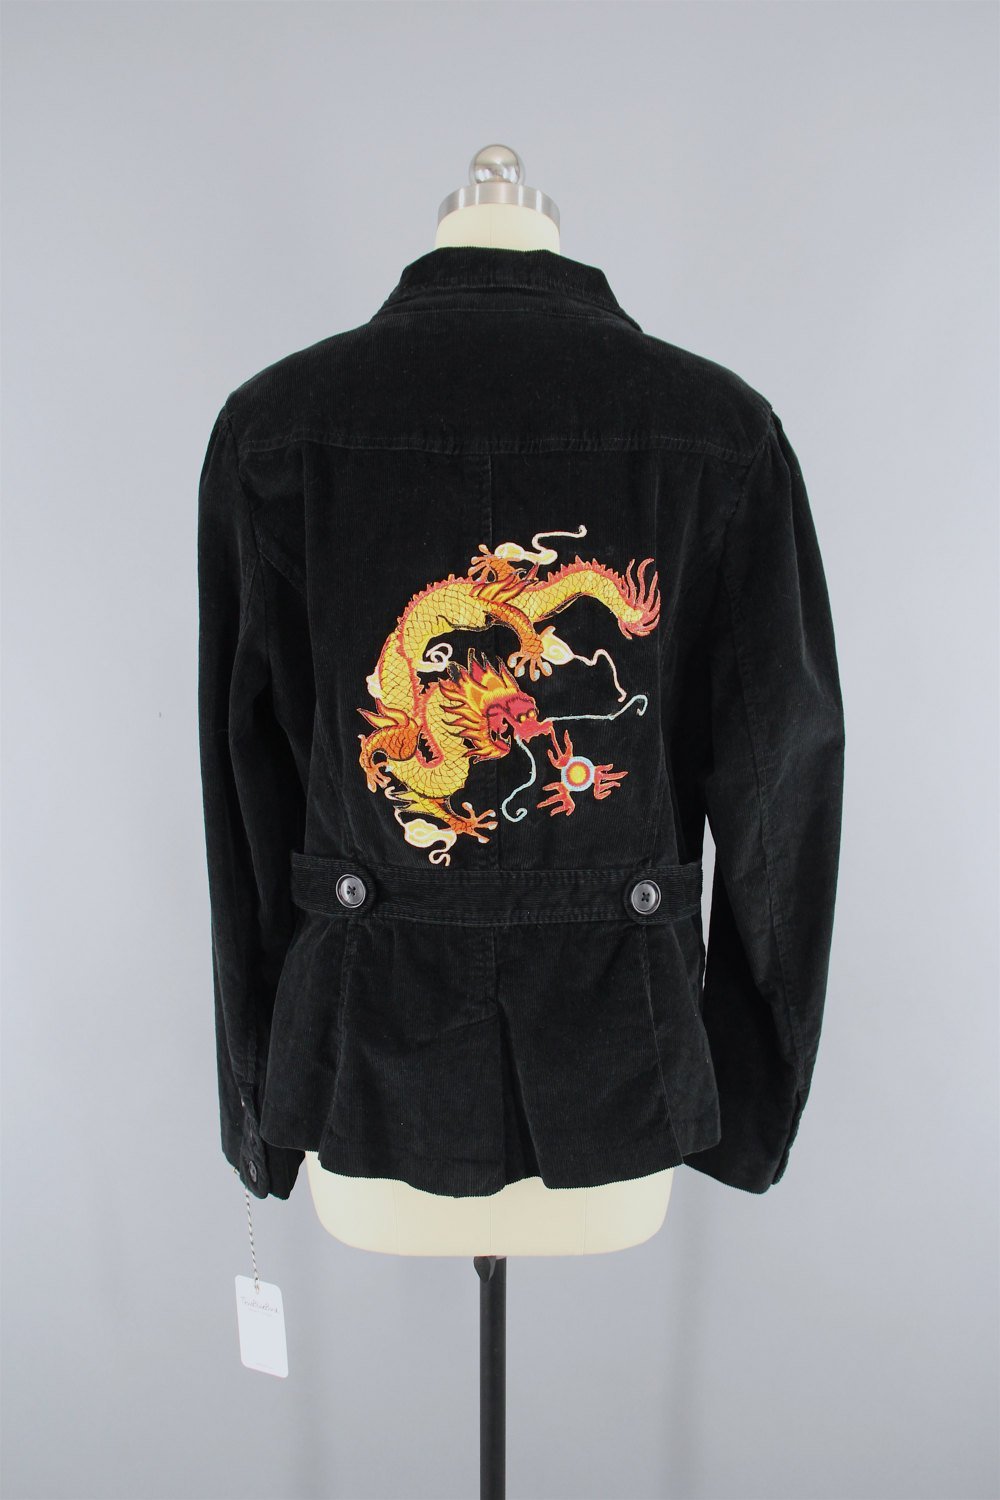 BLACK Corduroy Jacket with Golden Dragon Embroidered Patch - See Measurements / Blue - ThisBlueBird